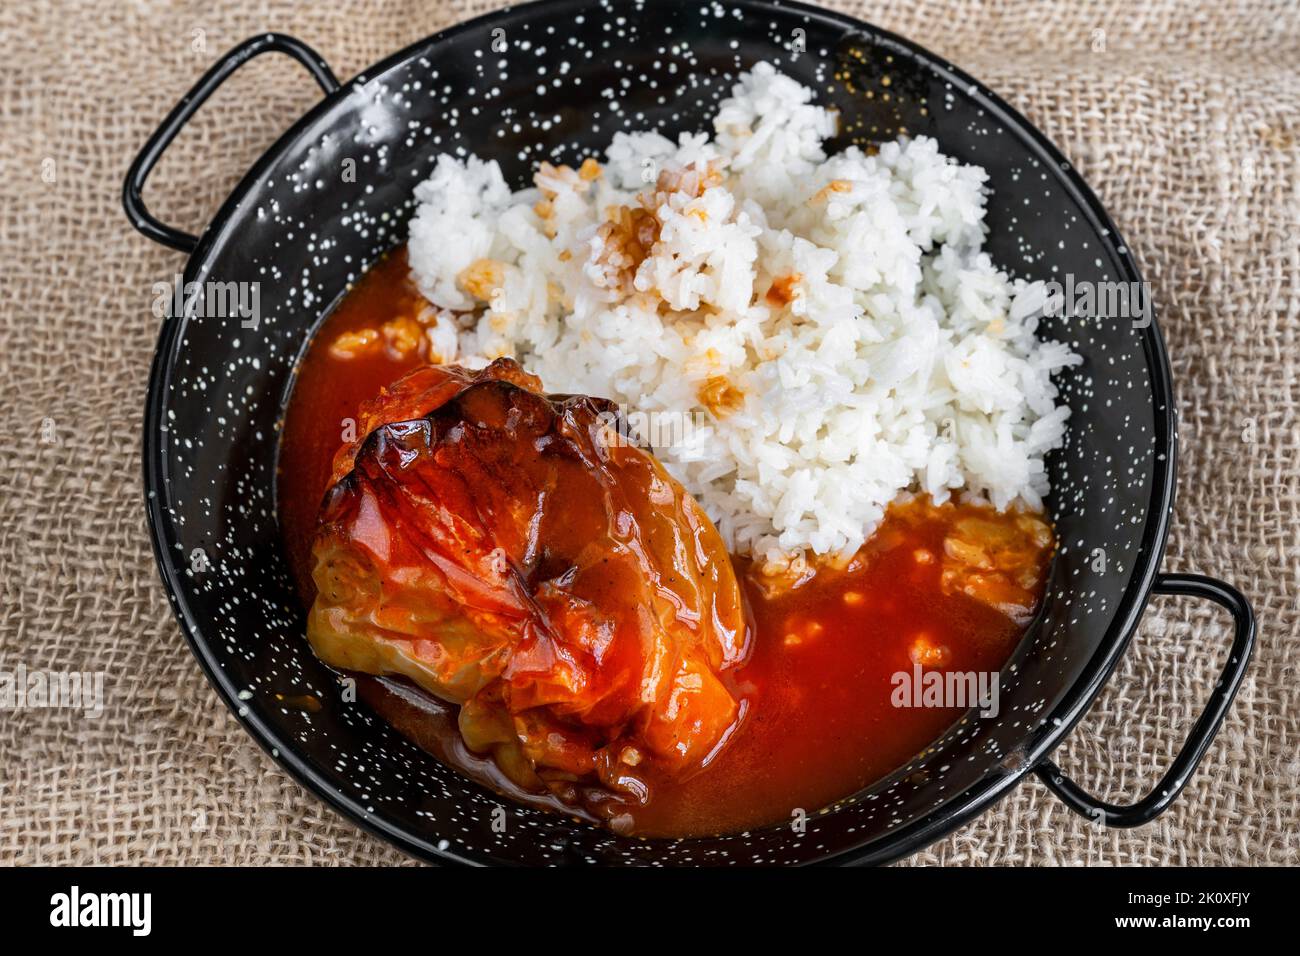 Baked stuffed paprika with minced beef in tomato sauce with stewed rice on black rustic pan on jute fabric background. Stock Photo